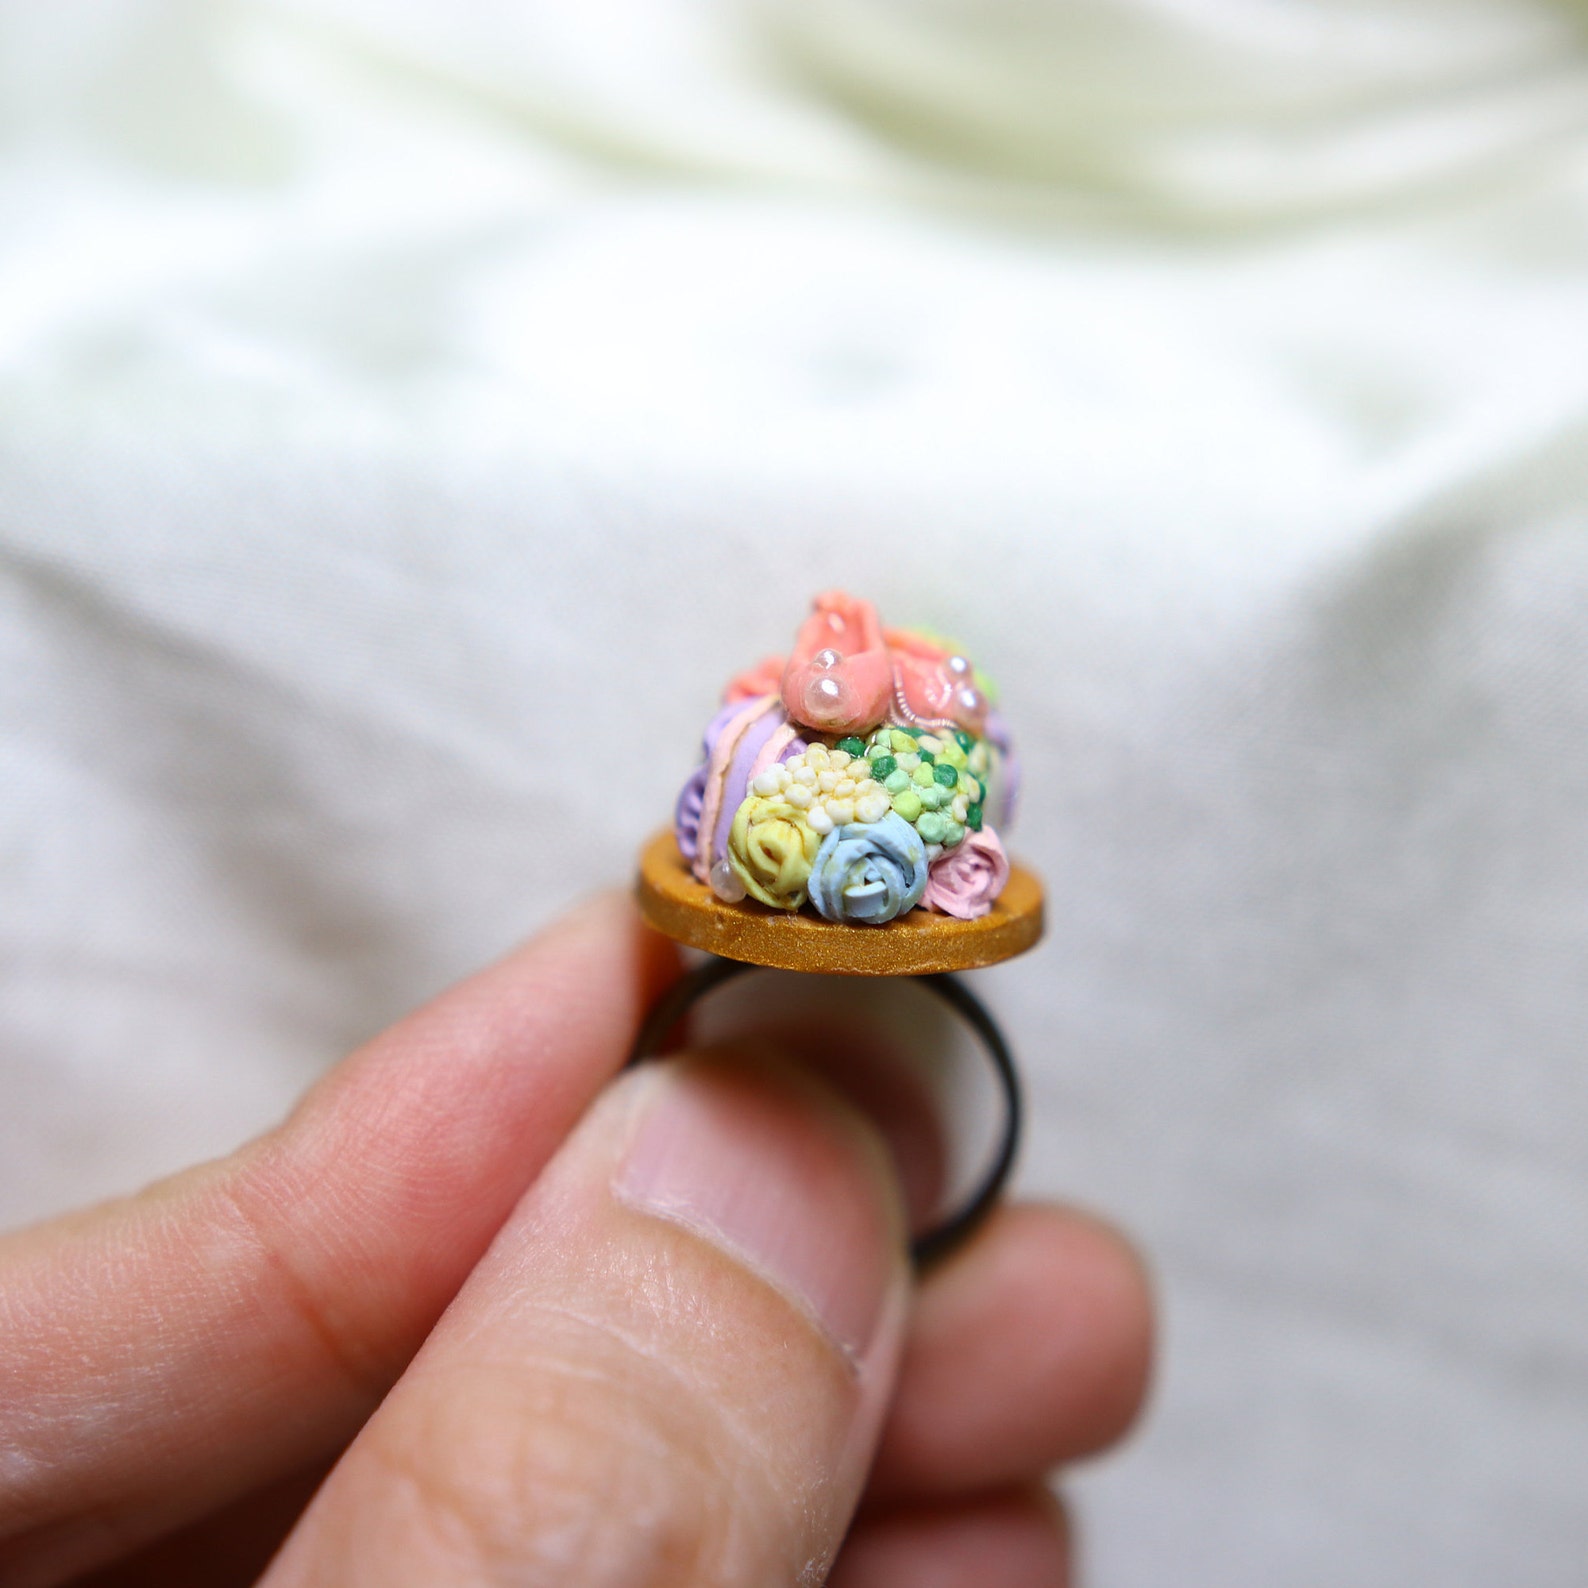 ballet shoes on a cake ring, cute ring, polymer clay ring, handmade beautiful ring jewelry, gift for her